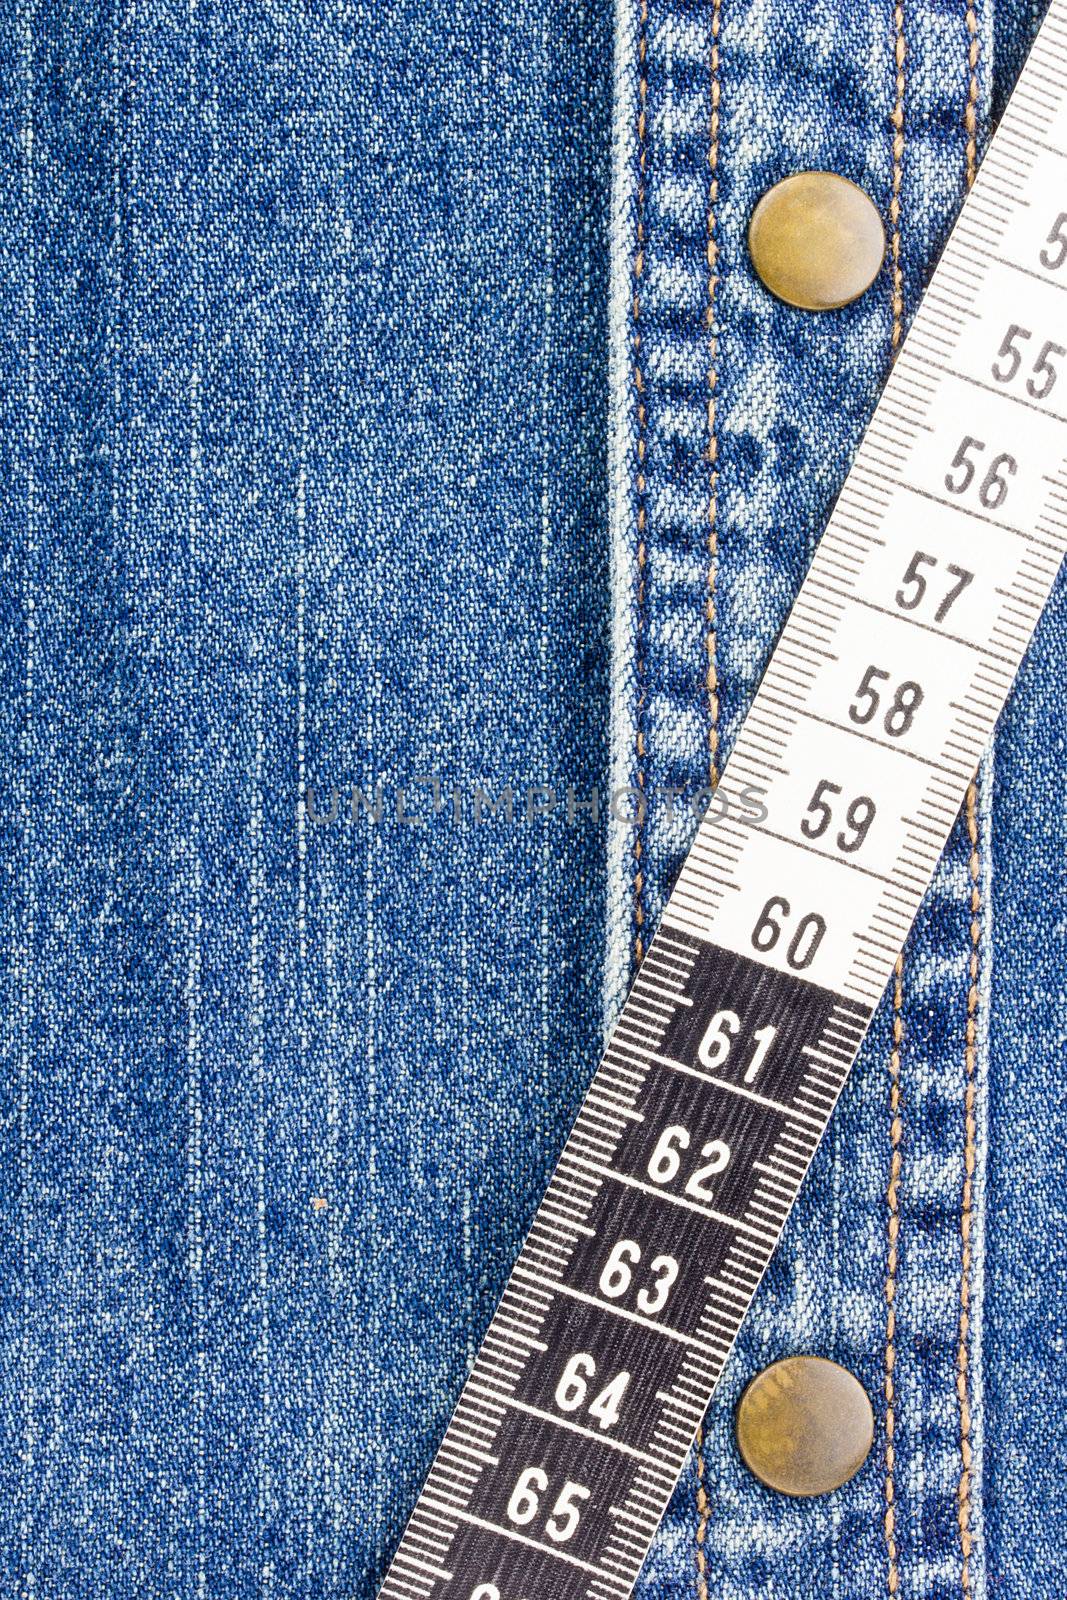 Close-up photograph of measuring tape on denim material. Add your text to the background.